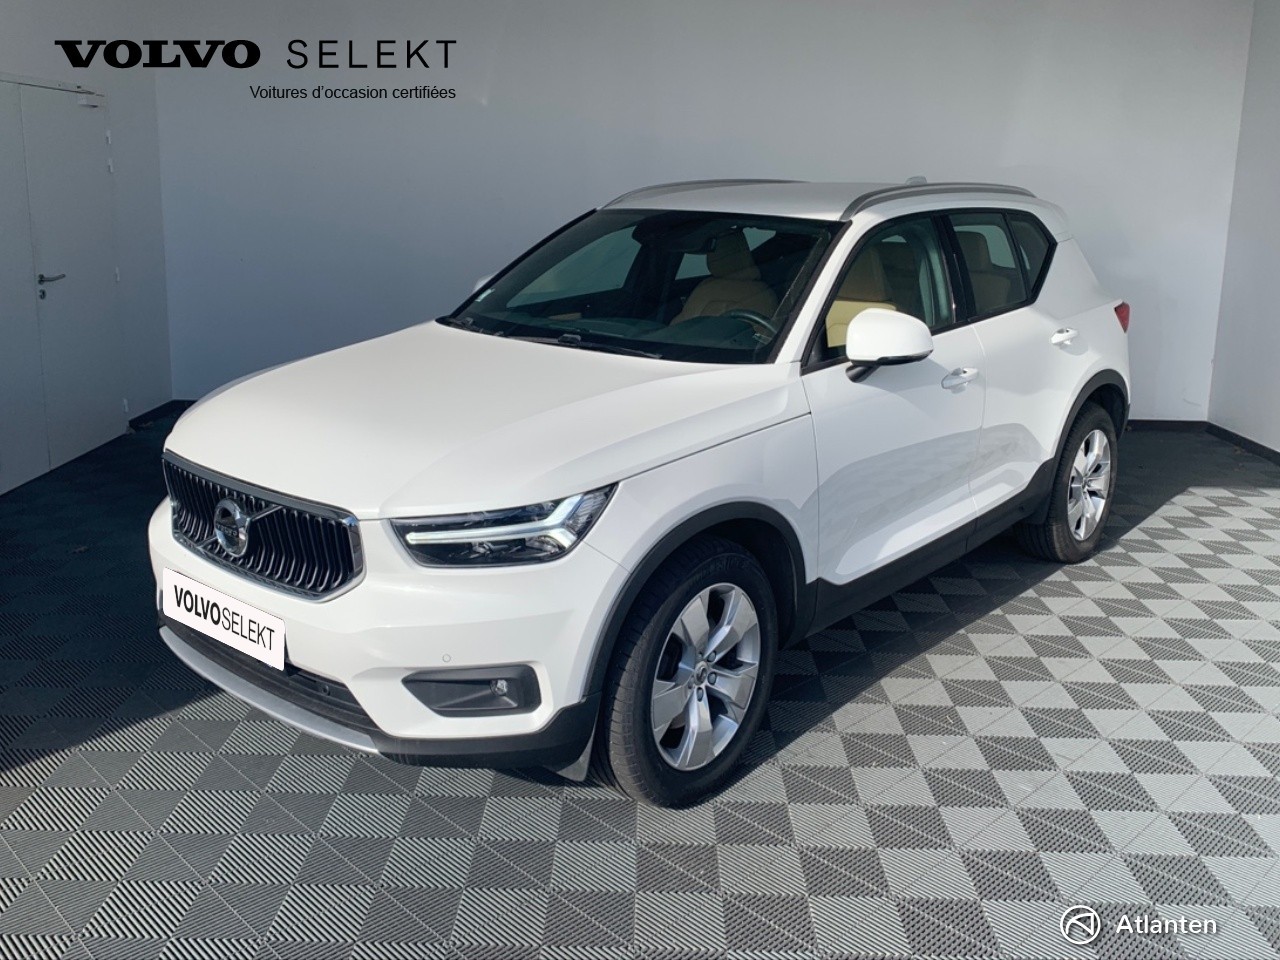 VOLVO XC40 BUSINESS XC40 D4 AWD AdBlue 190 ch Geartronic 8 - Véhicule Occasion Océane Auto